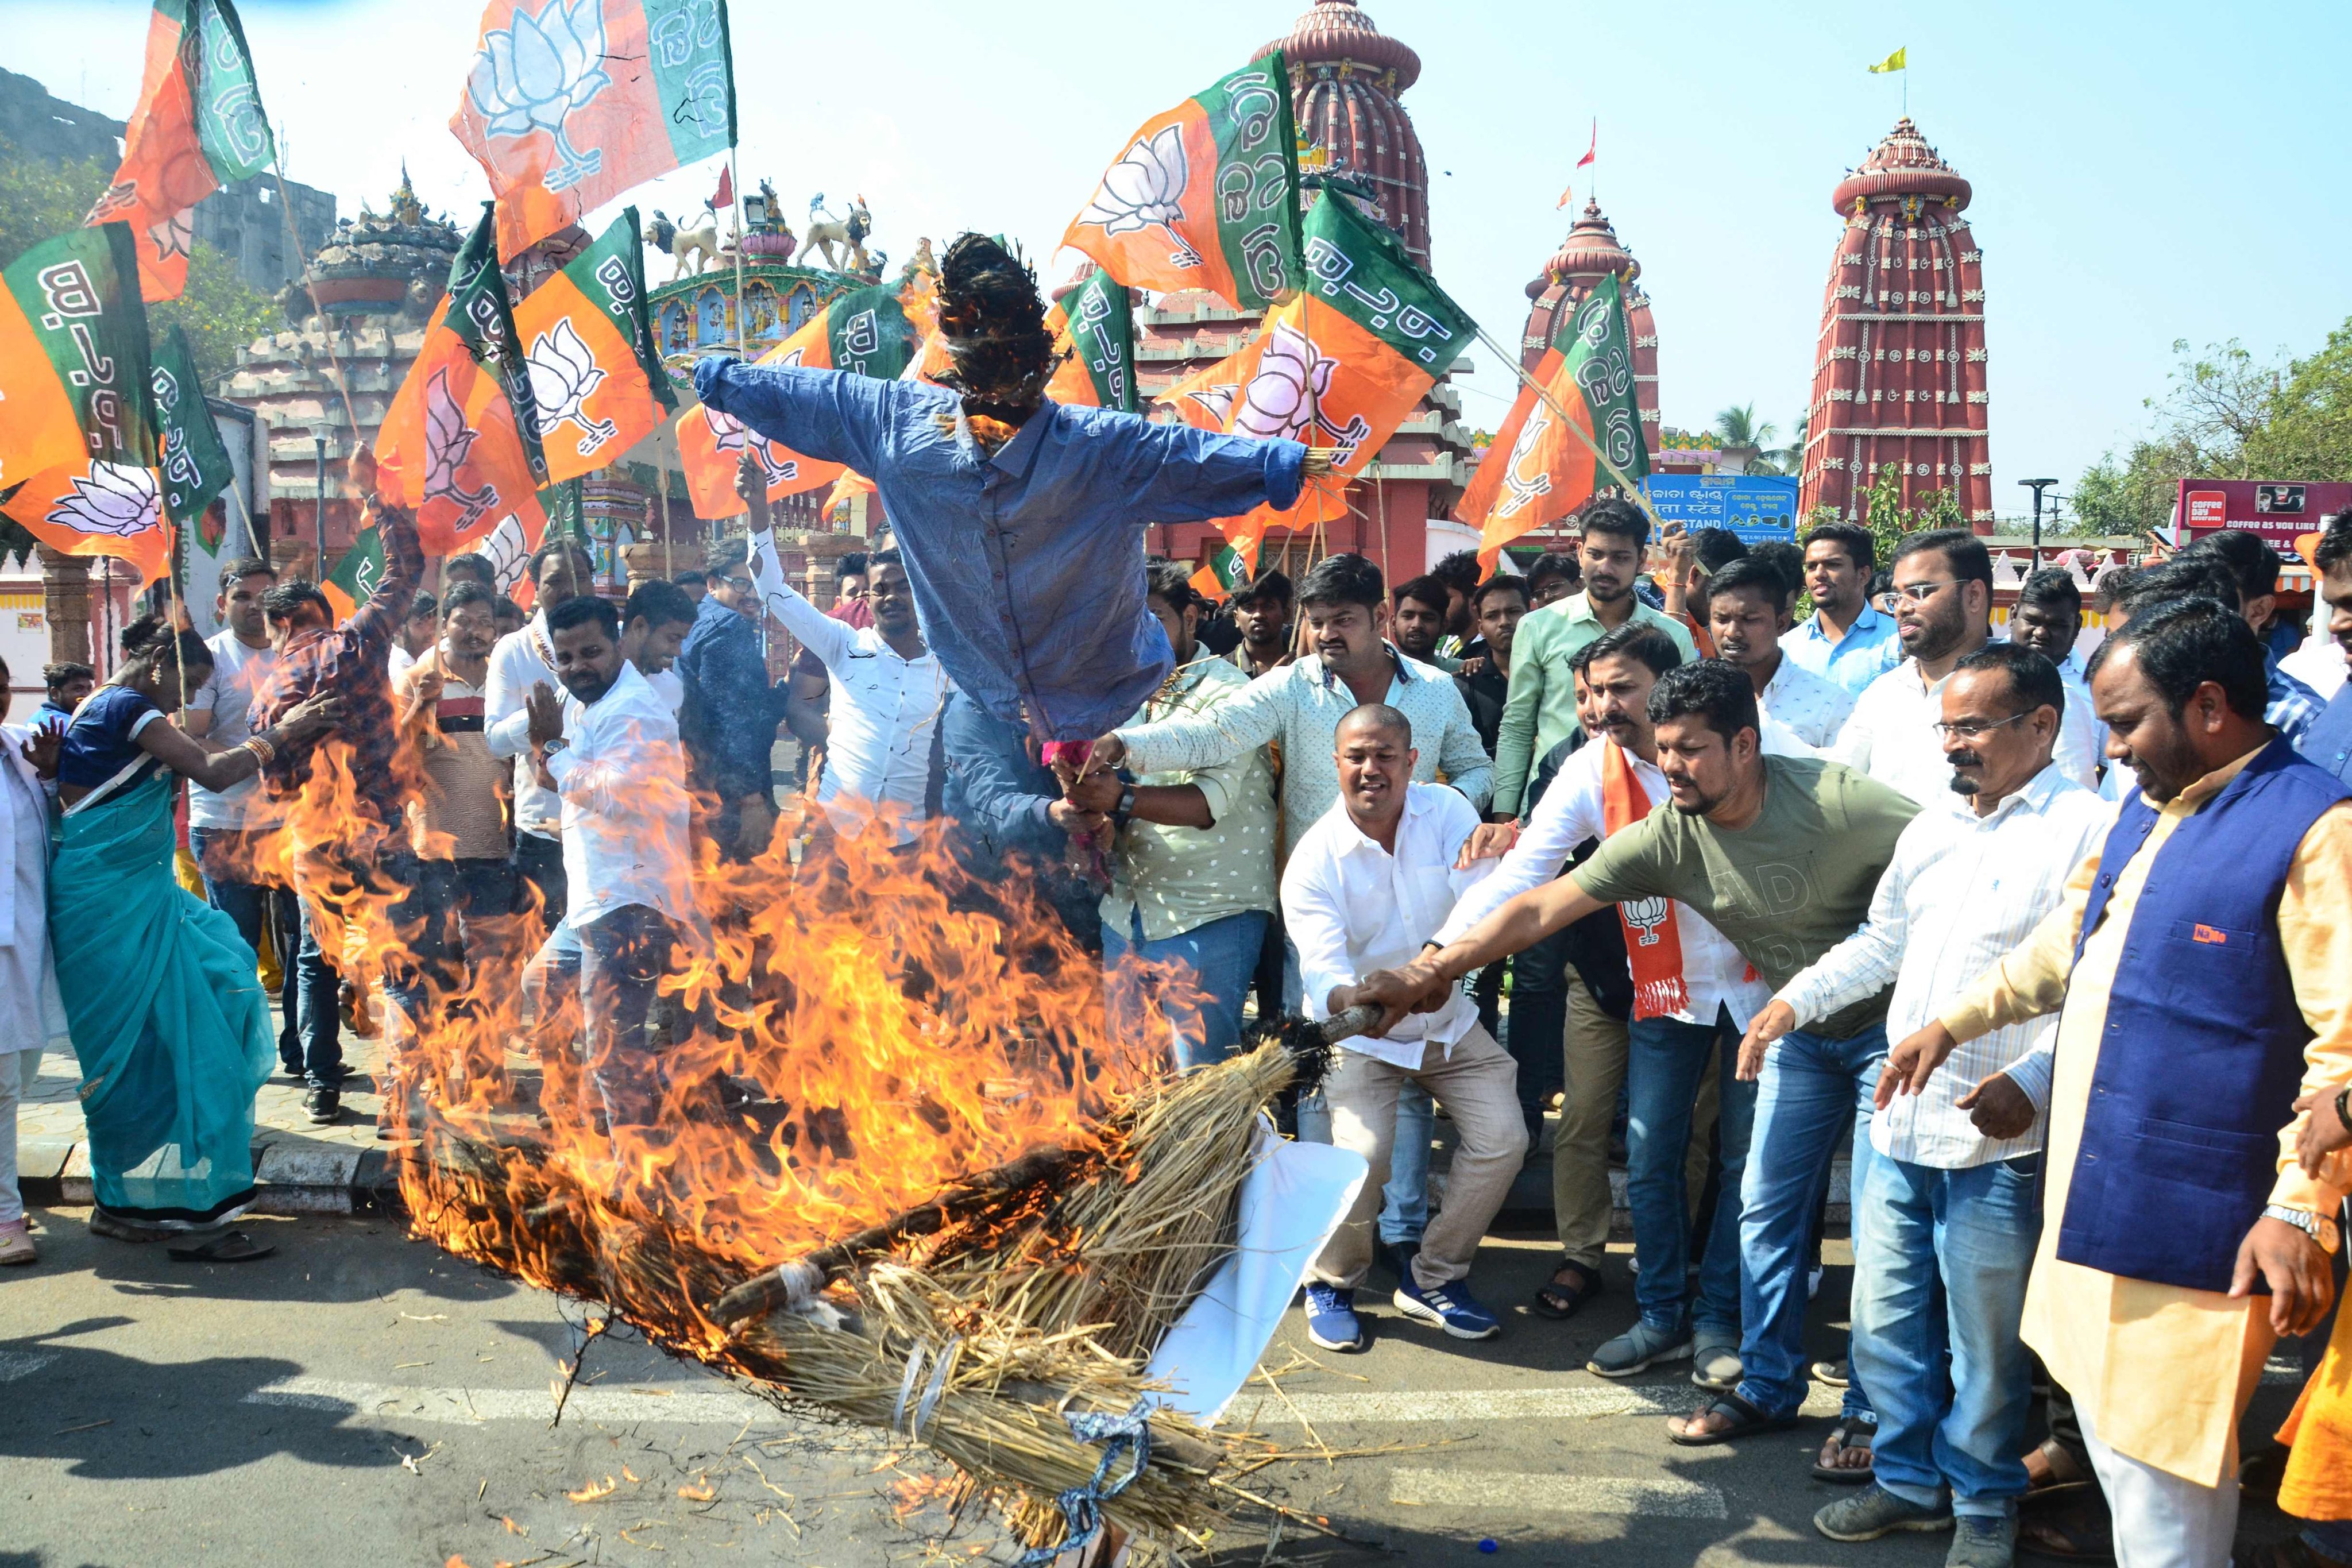 Activists from India’s ruling Bharatiya Janata Party (BJP) take part in a demonstration in Bhubaneshwar on December 17, 2022. BJP supporters set fire to an effigy of Pakistan Foreign Minister Bilawal Bhutto Zardari during a protest against remarks he made about Indian Prime Minister Narendra Modi during a press conference at the United Nations. Photo: AFP